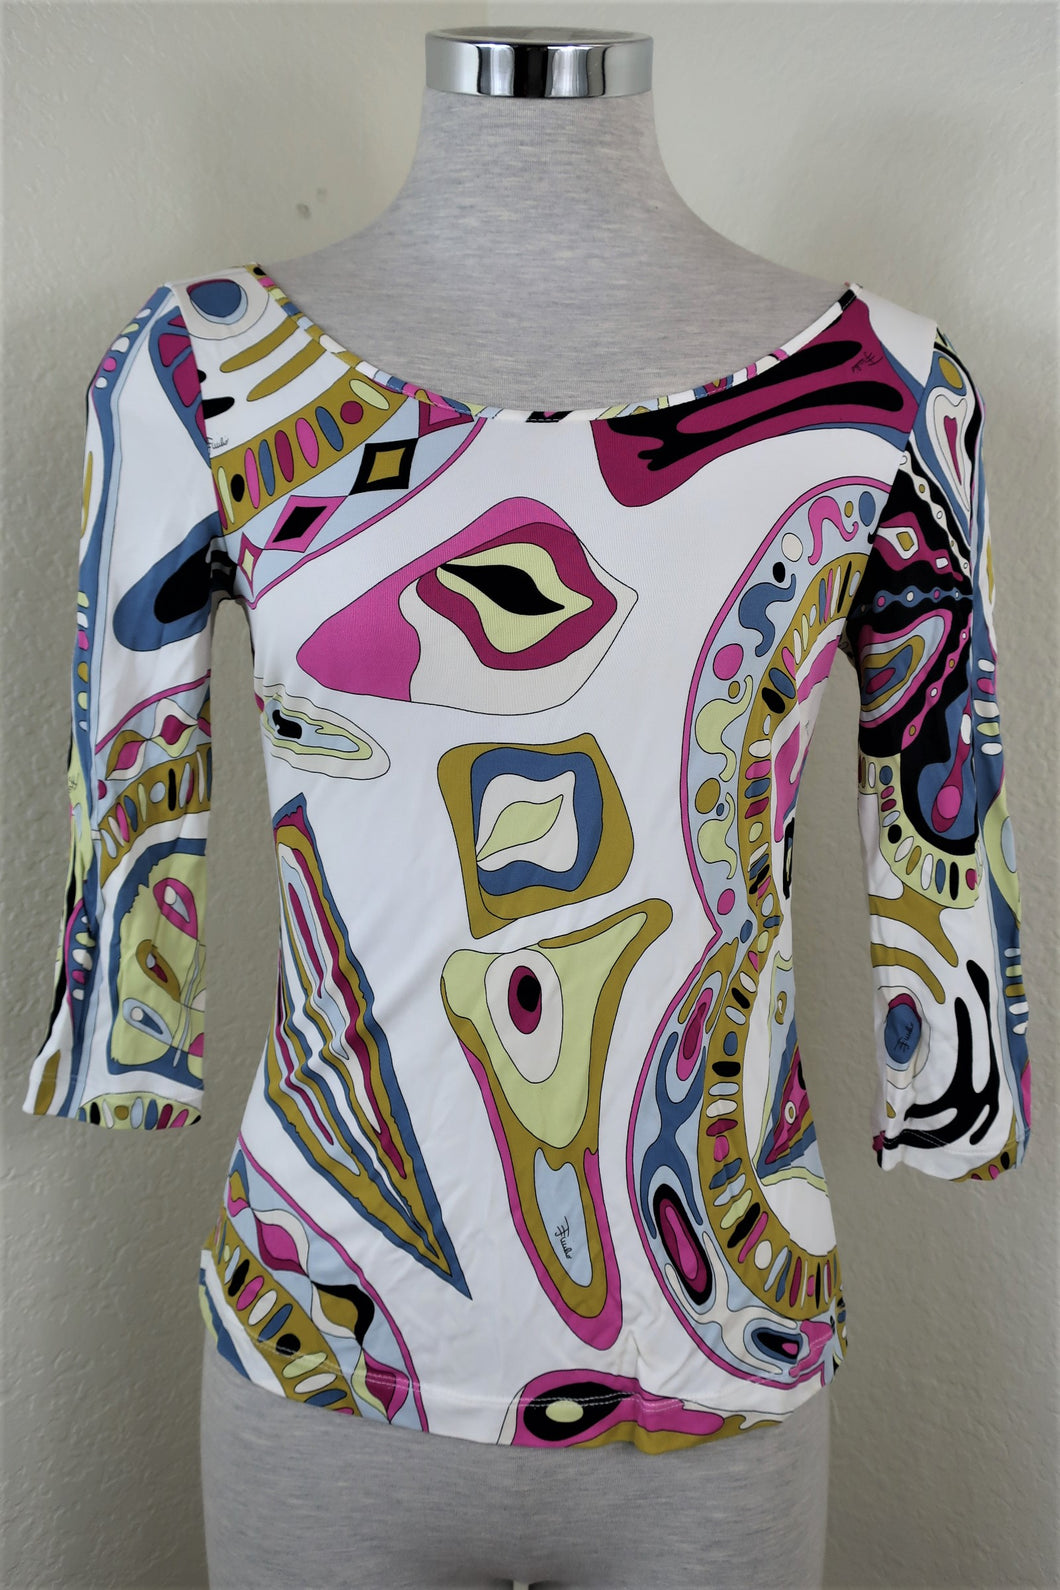 EMILIO PUCCI Colorful 3/4 Sleeve Top Blouse